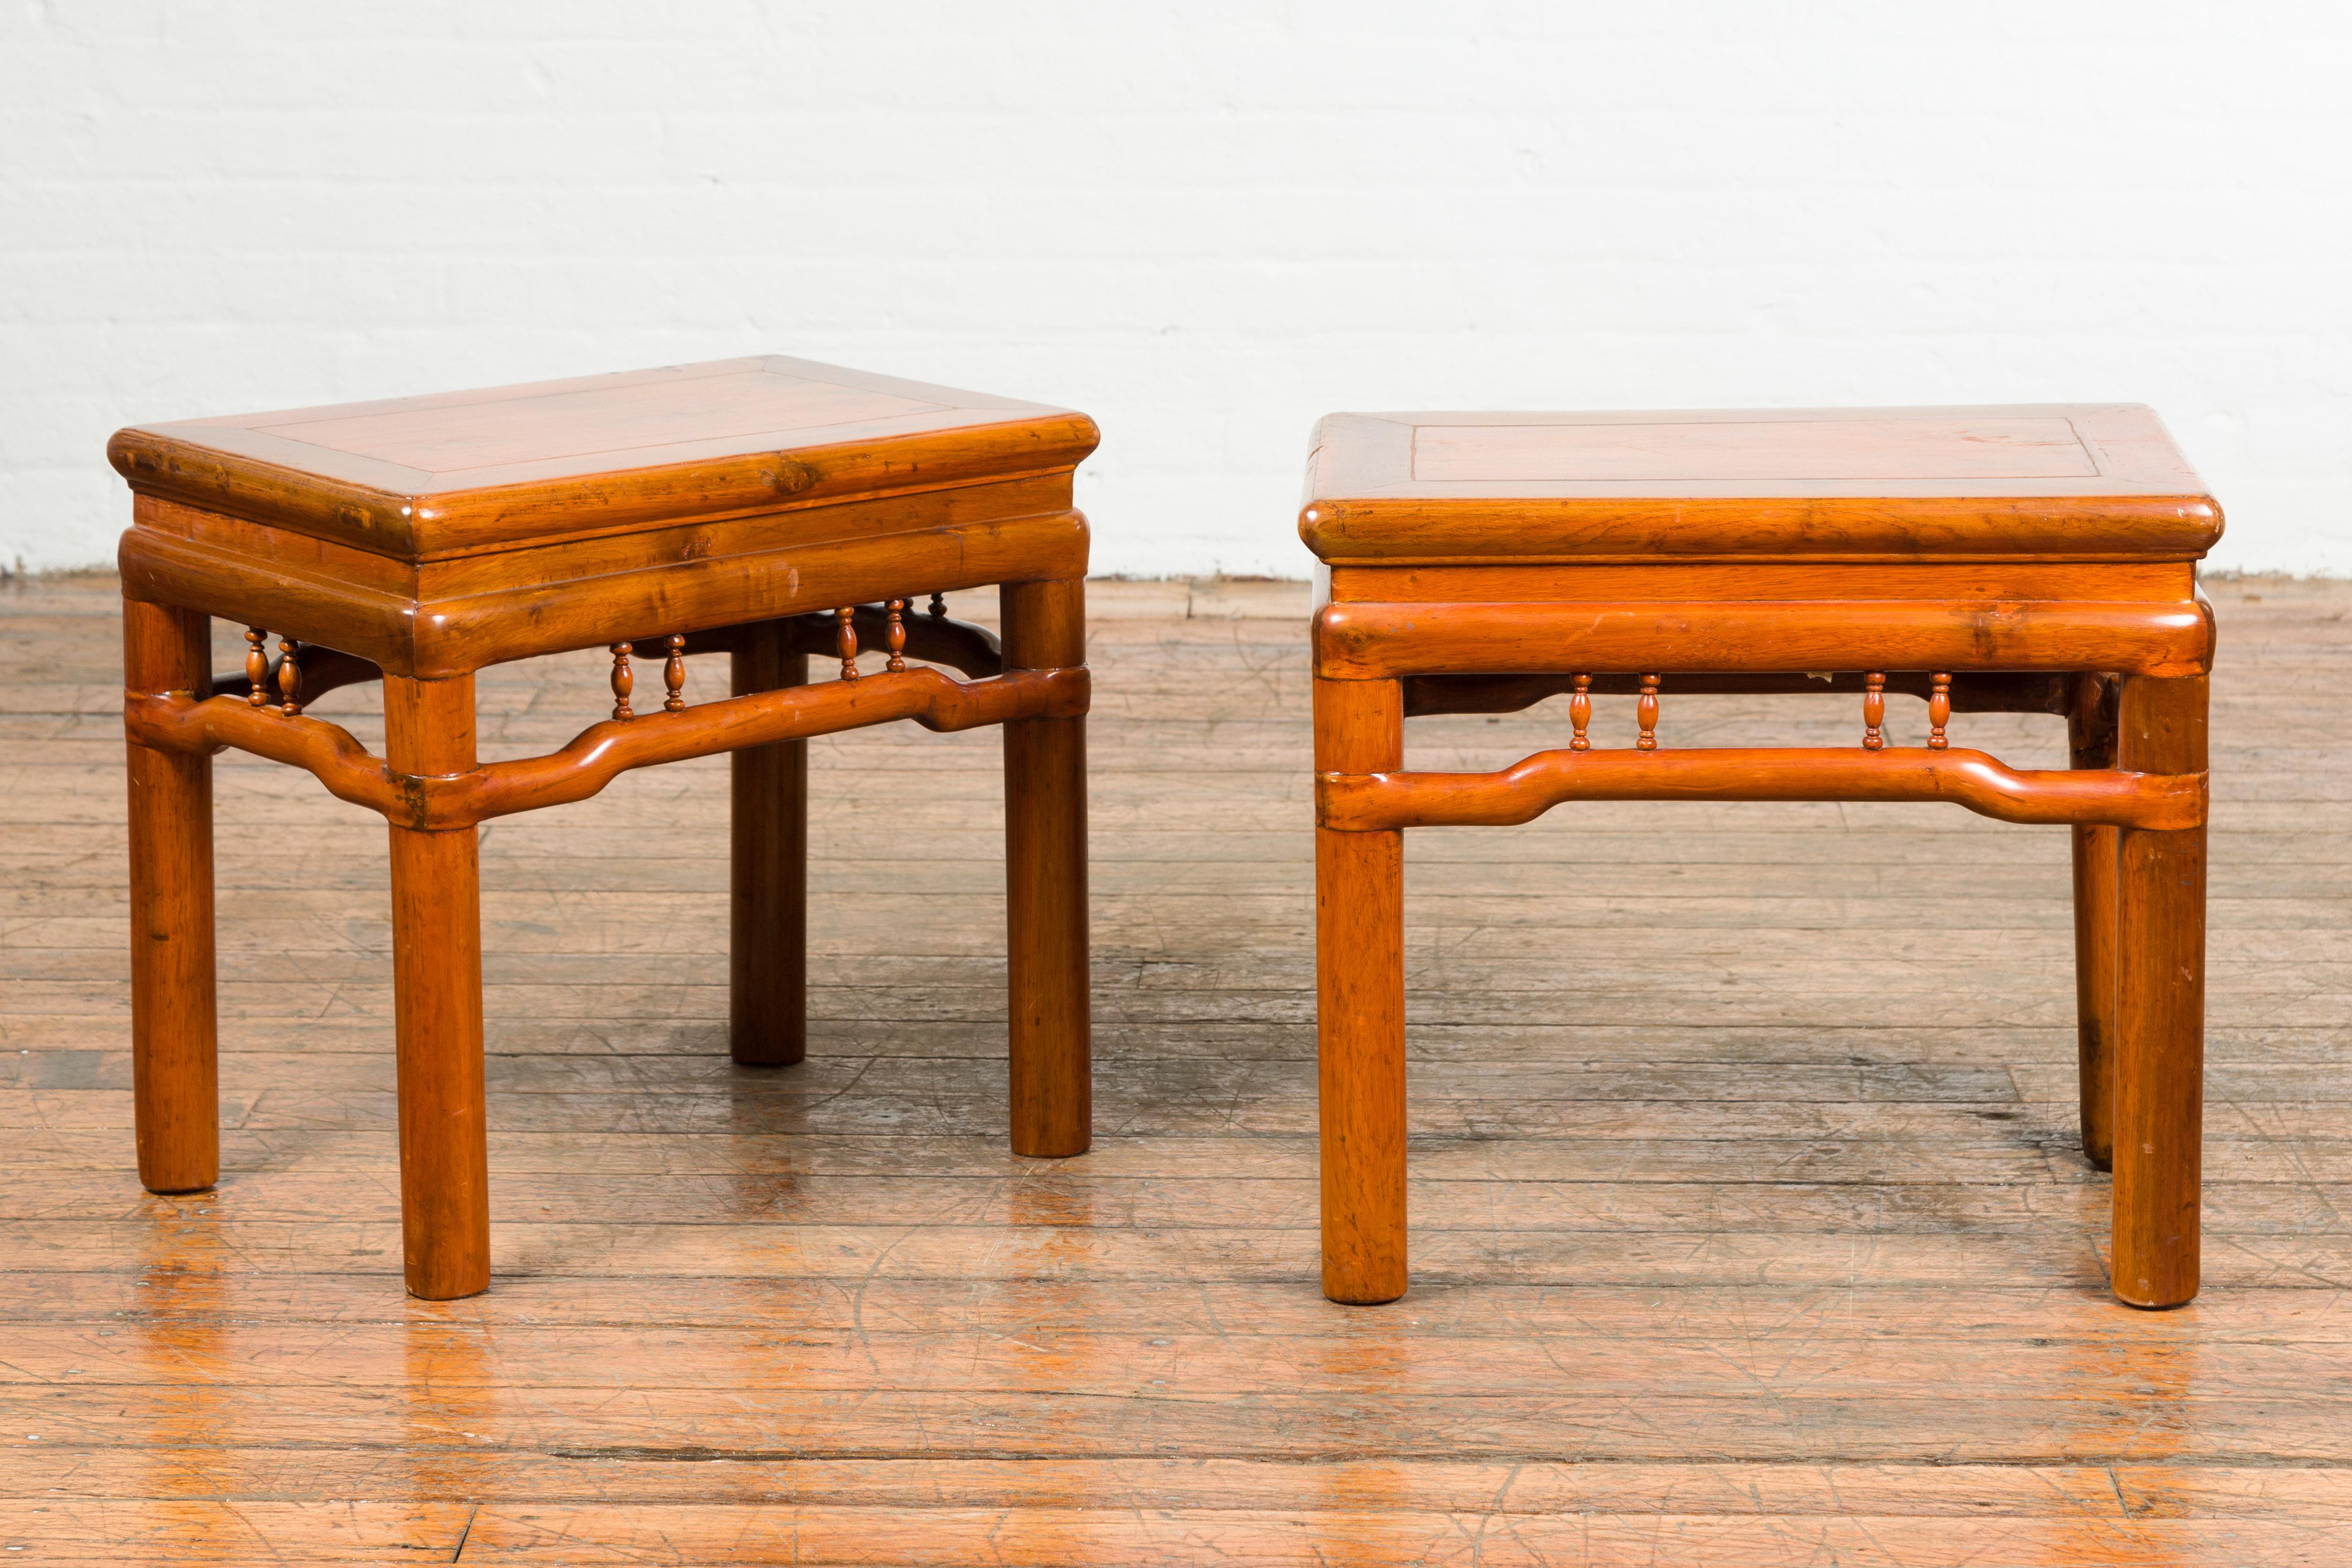 A pair of Chinese Qing Dynasty period side tables from the 19th century, with humpback stretchers. Created in China during the Qing Dynasty period, each of this pair of side tables features a square waisted top with central board, sitting above a